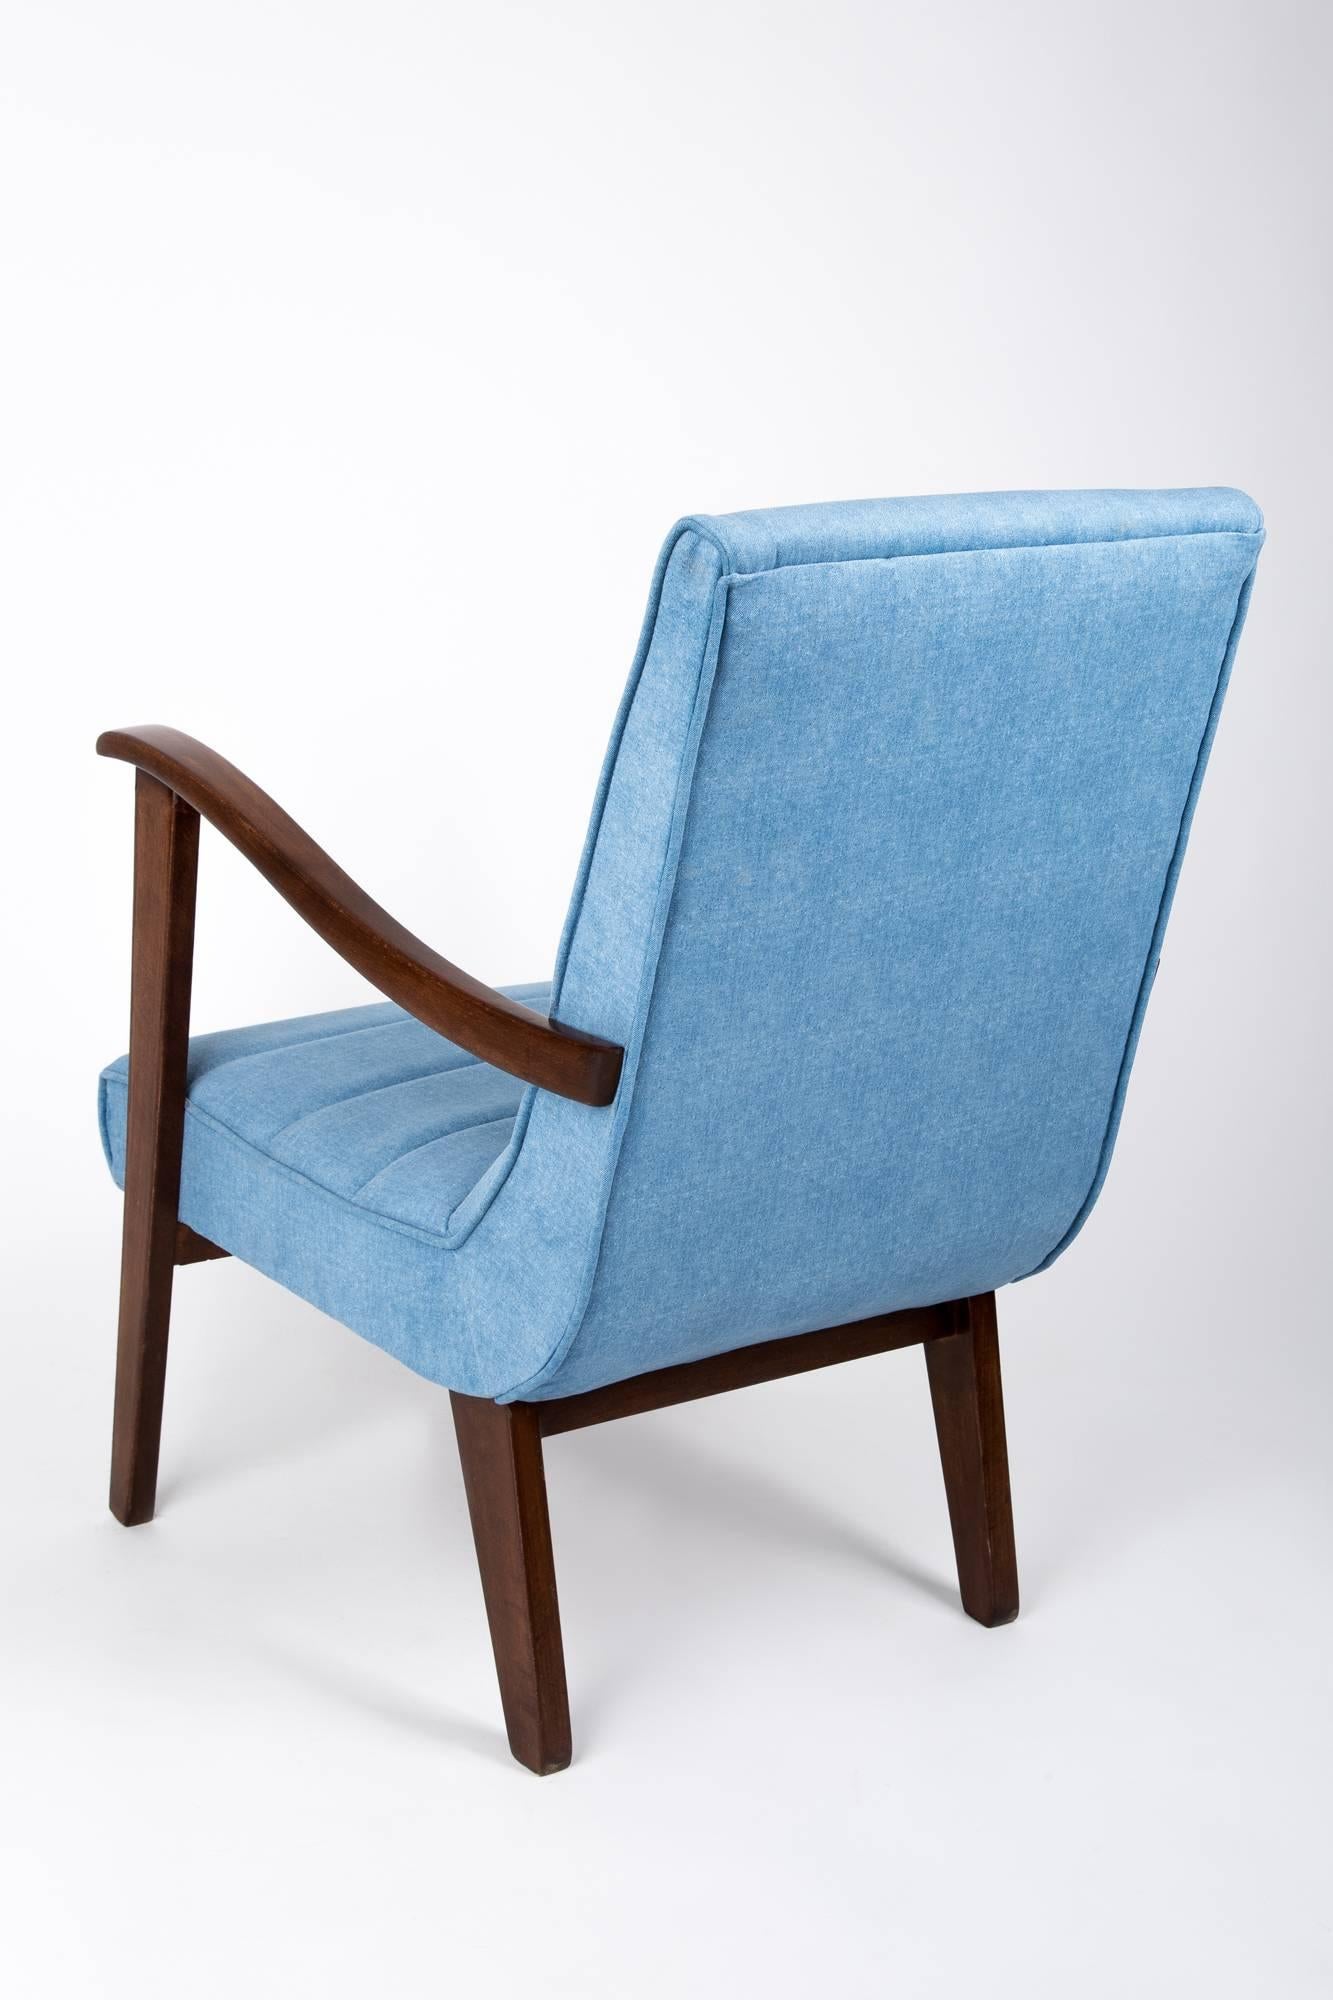 Textile Set of Two Mid-Century Modern Blue Armchairs by Prudnik Factory, 1960s, Poland For Sale